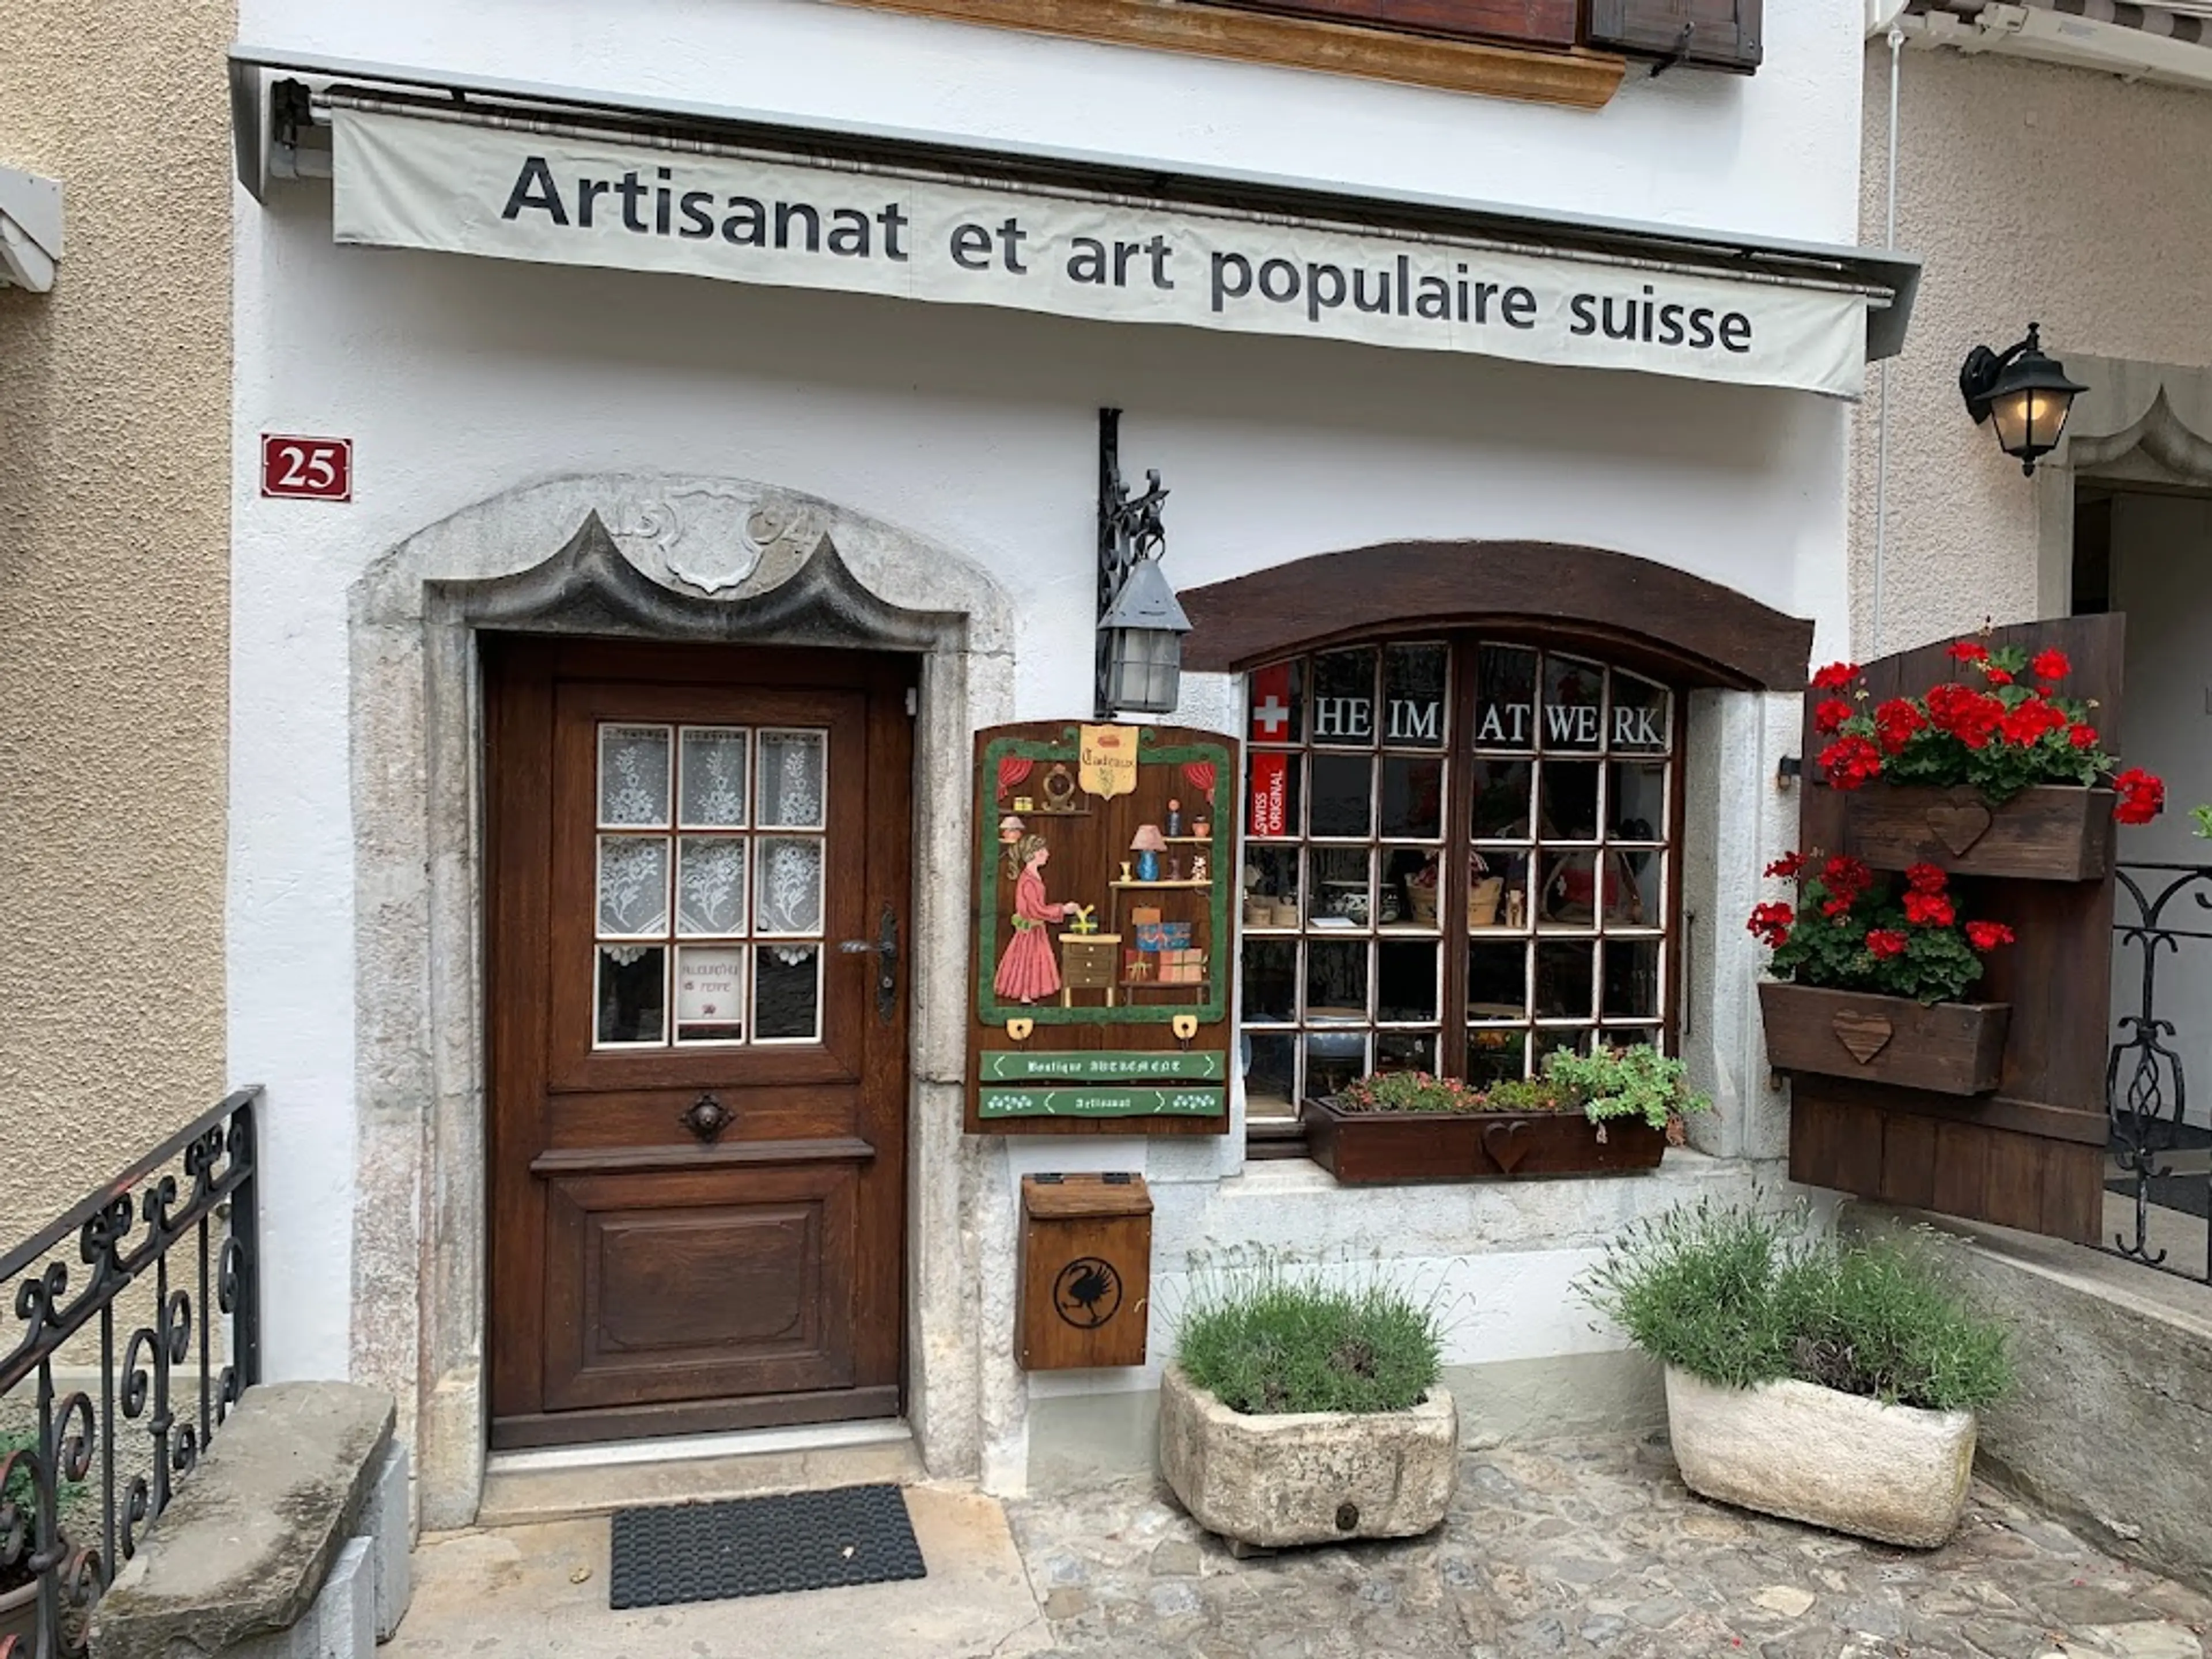 Local shops and boutiques